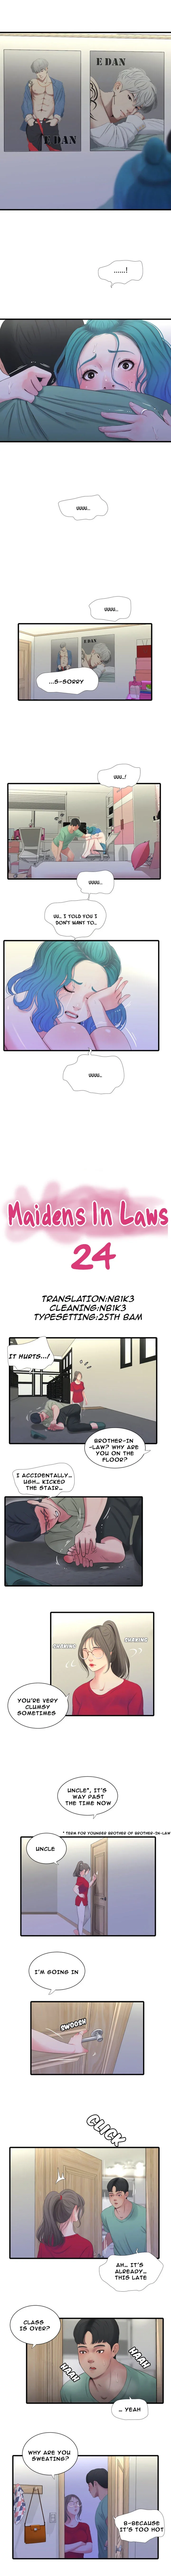 maidens-in-law-chap-24-2